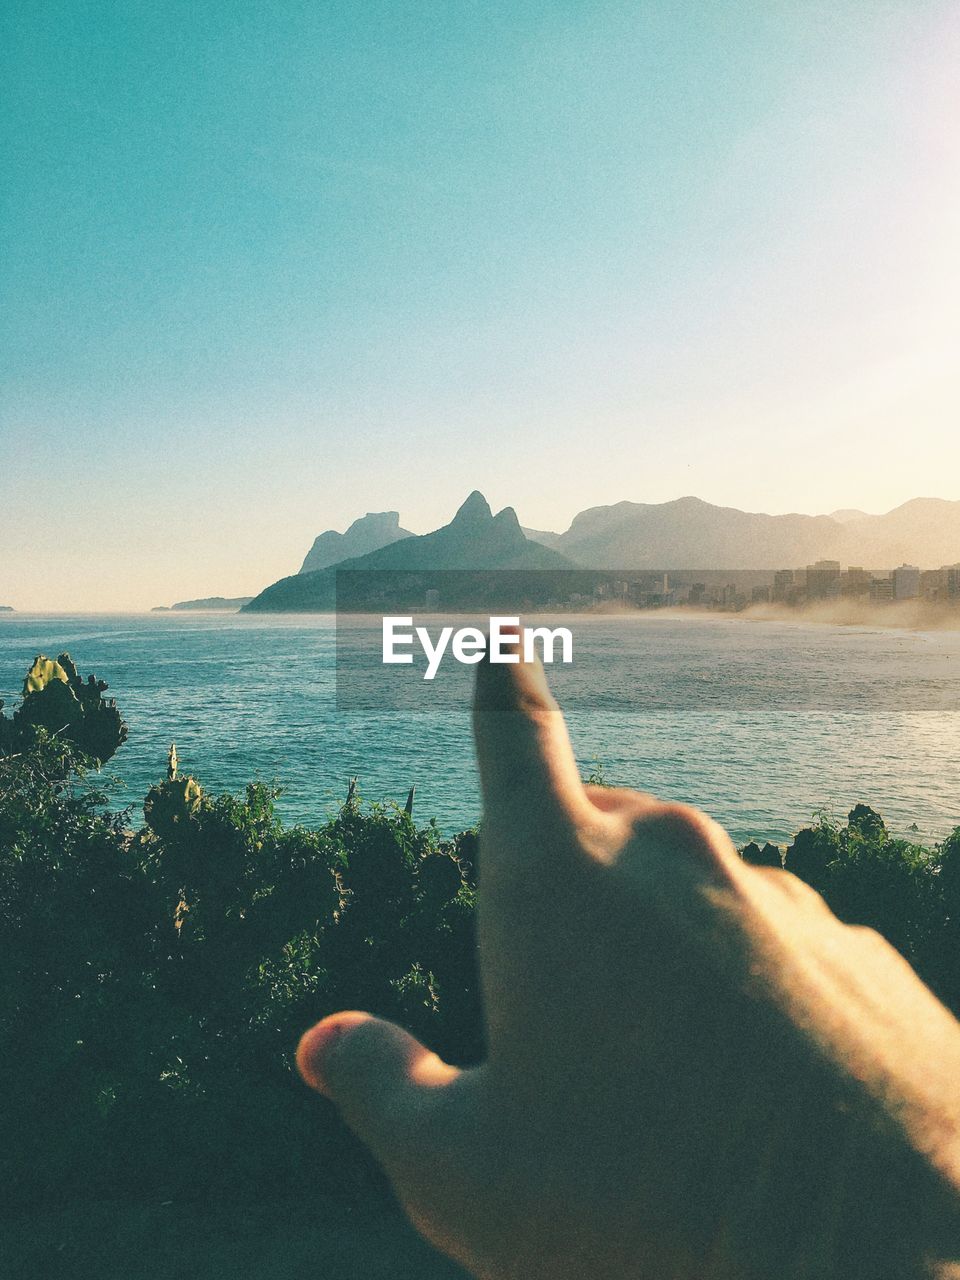 Cropped image of man pointing at mountain by sea against sky